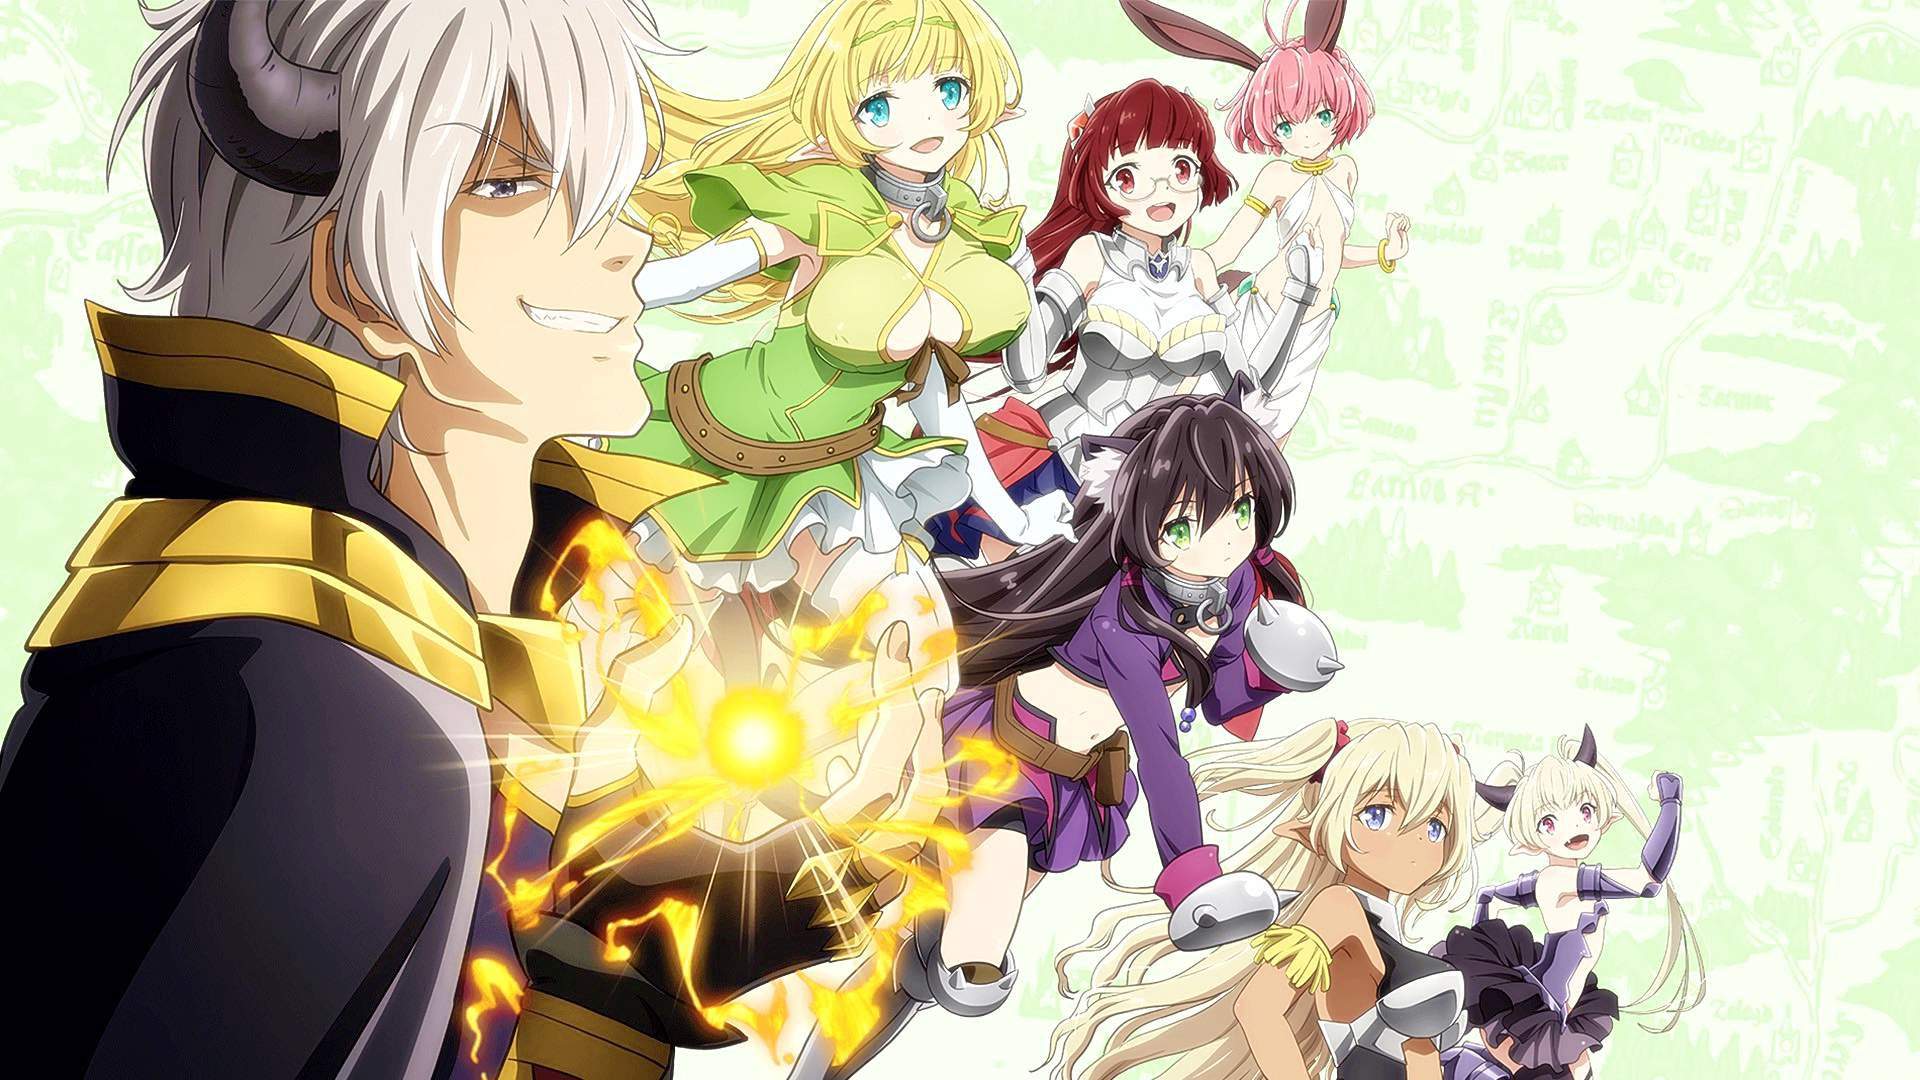 Anime: How not to Summon a Demon Lord Anime Amino.